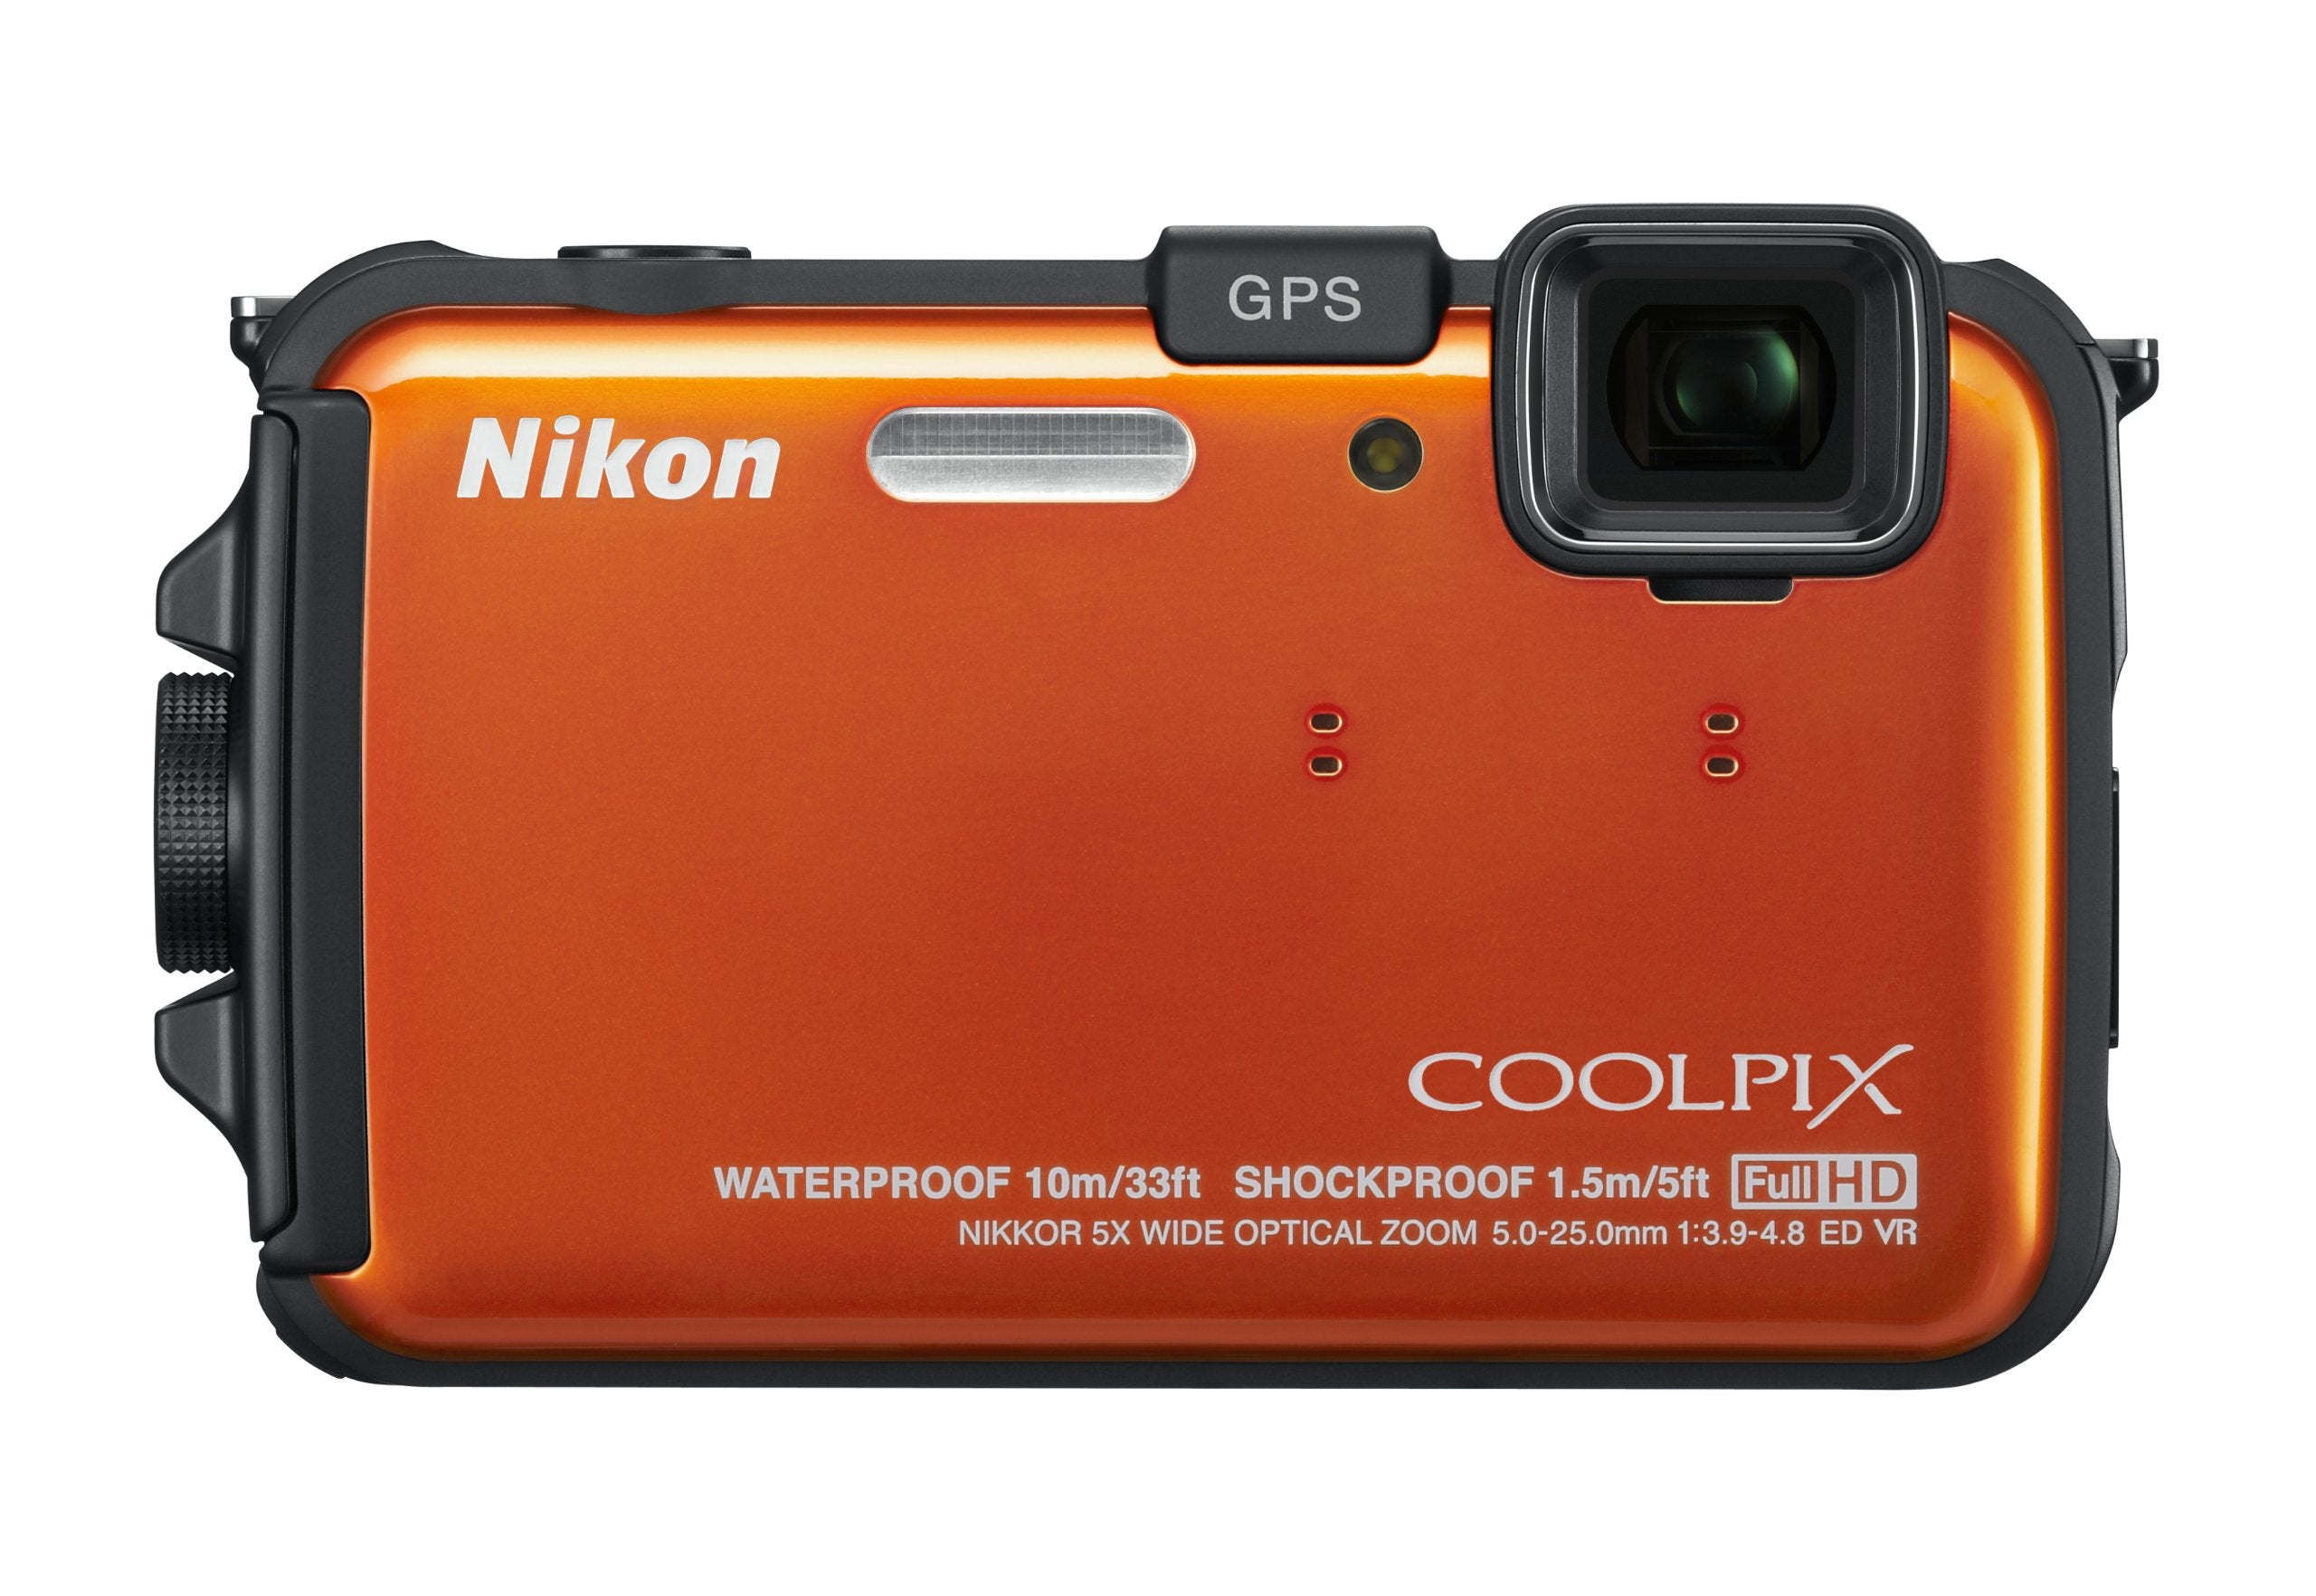 Nikon COOLPIX AW100 16 MP CMOS Waterproof Digital Camera with GPS and Full HD 1080p Video (Orange) (OLD MODEL)